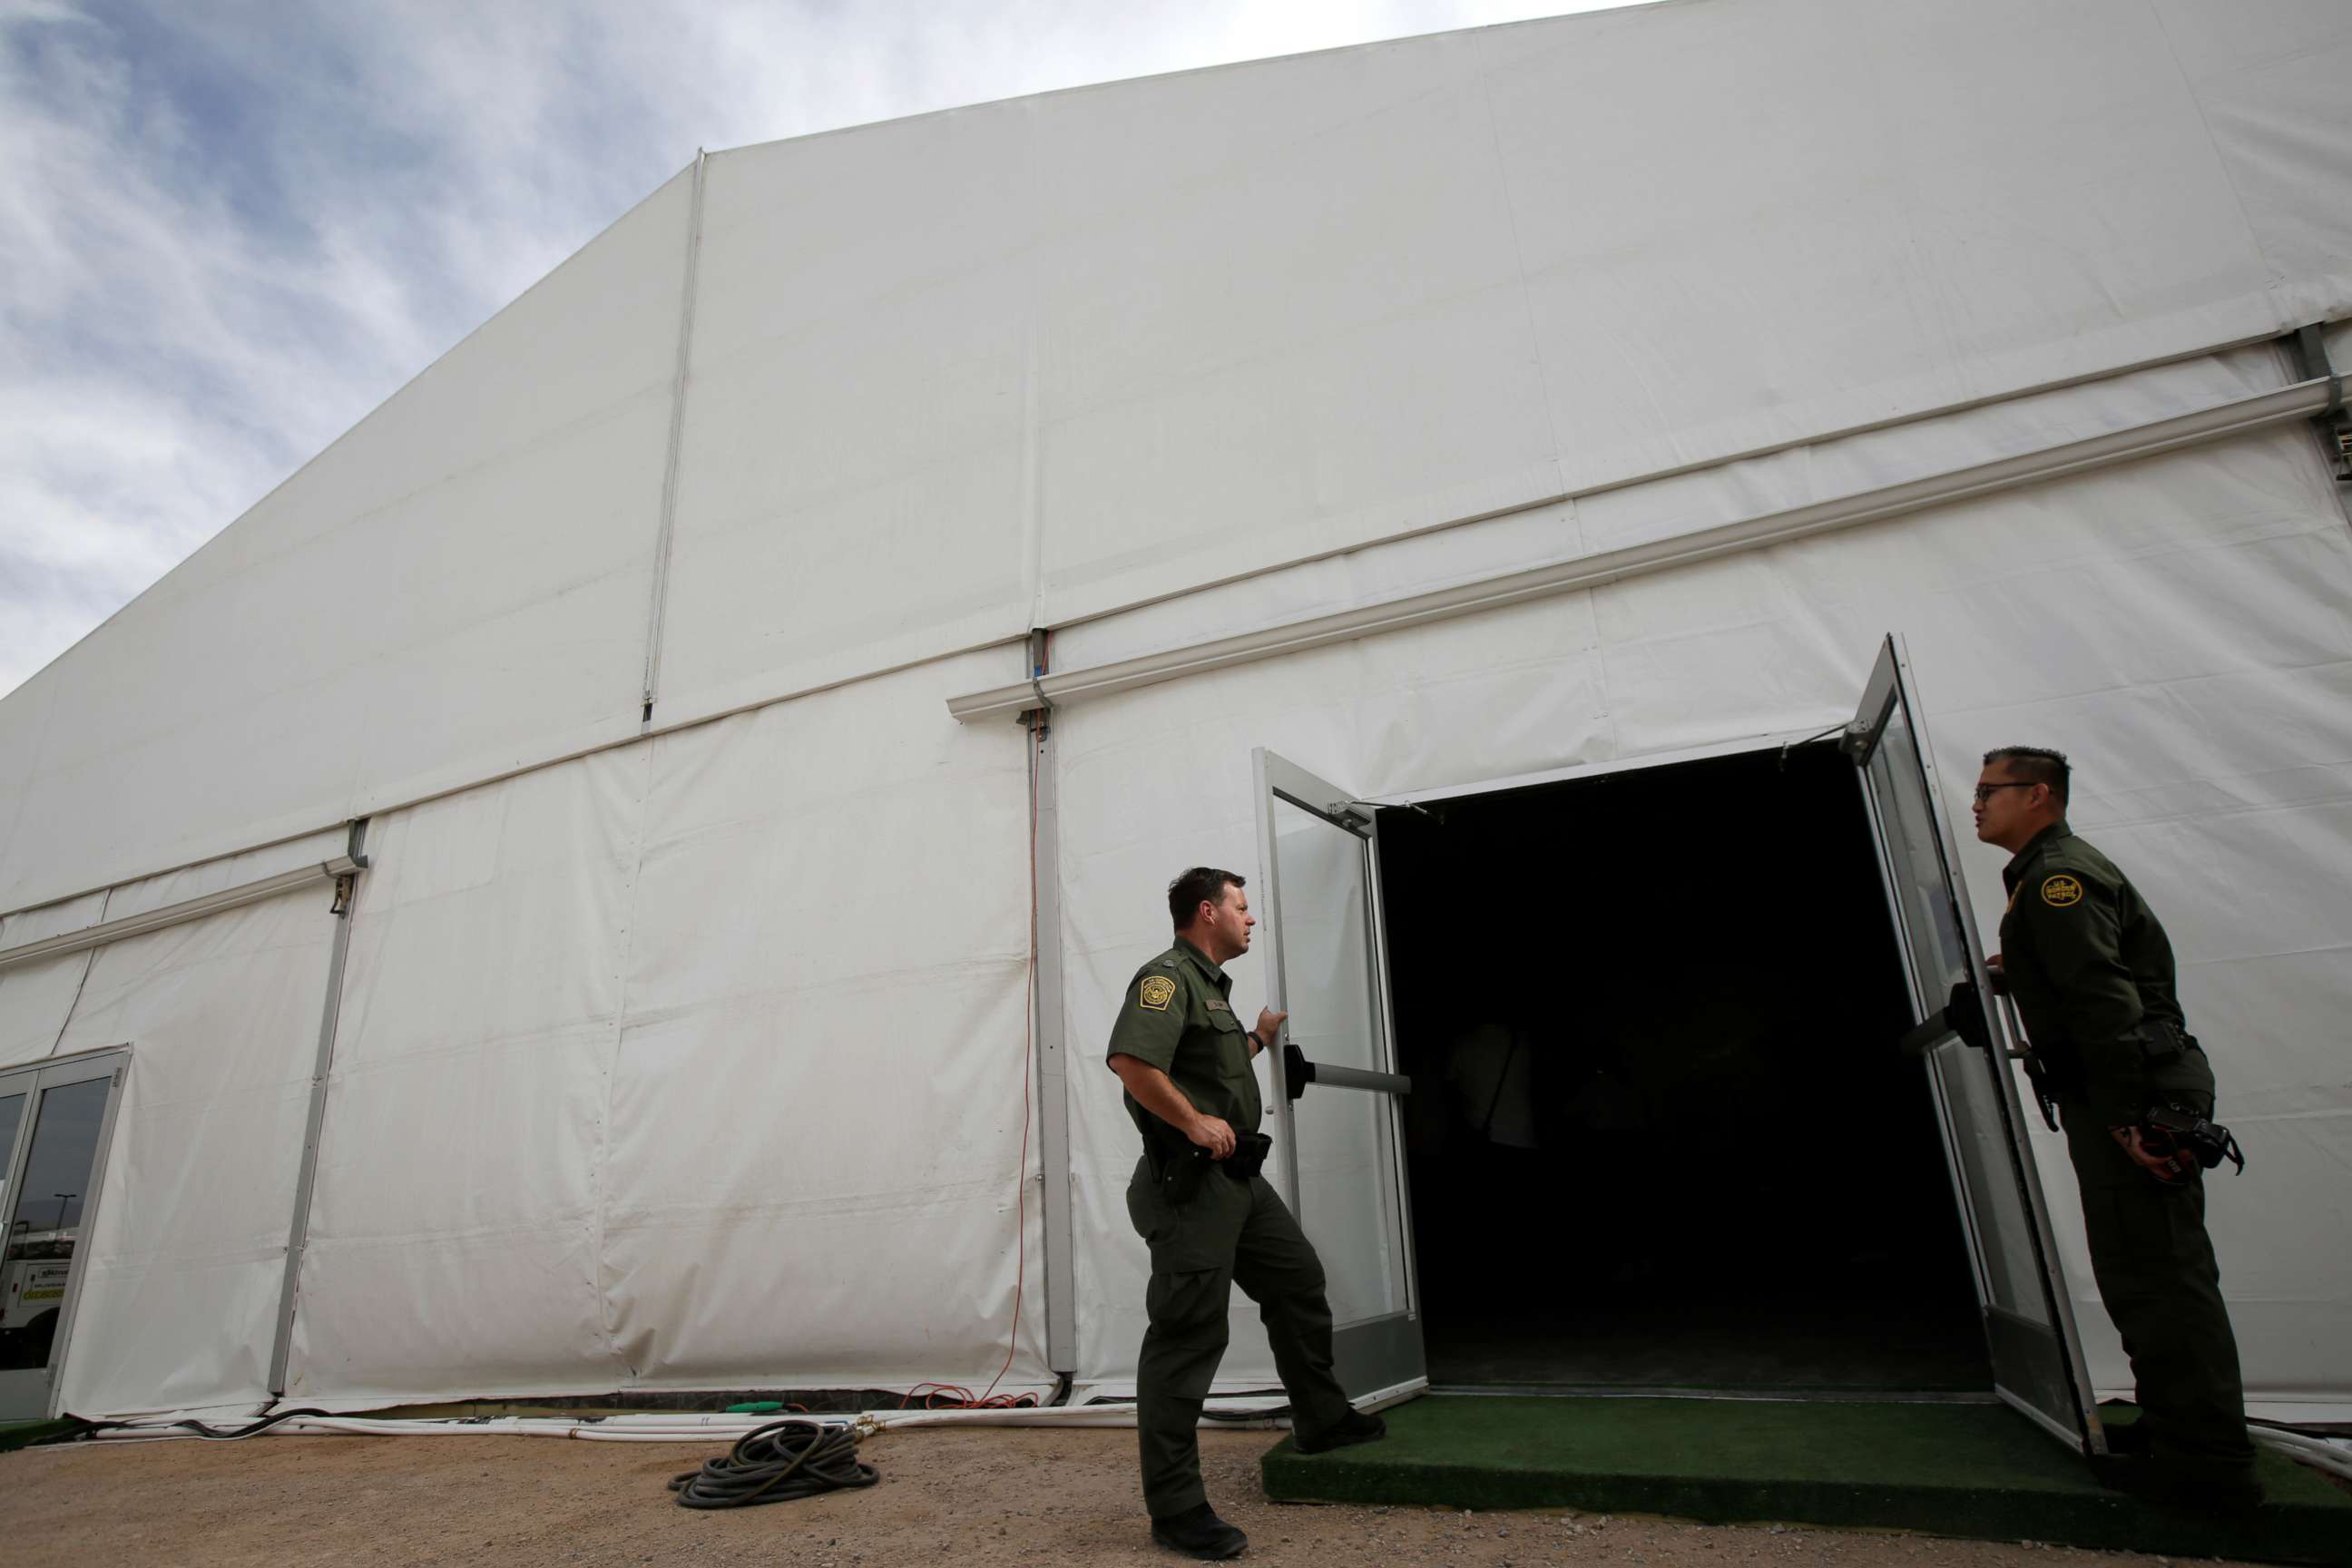 PHOTO: U.S. Border Patrol agents are seen during a tour of U.S. Customs and Border Protection (CBP) temporary holding facilities in El Paso, Texas, May 2, 2019. 